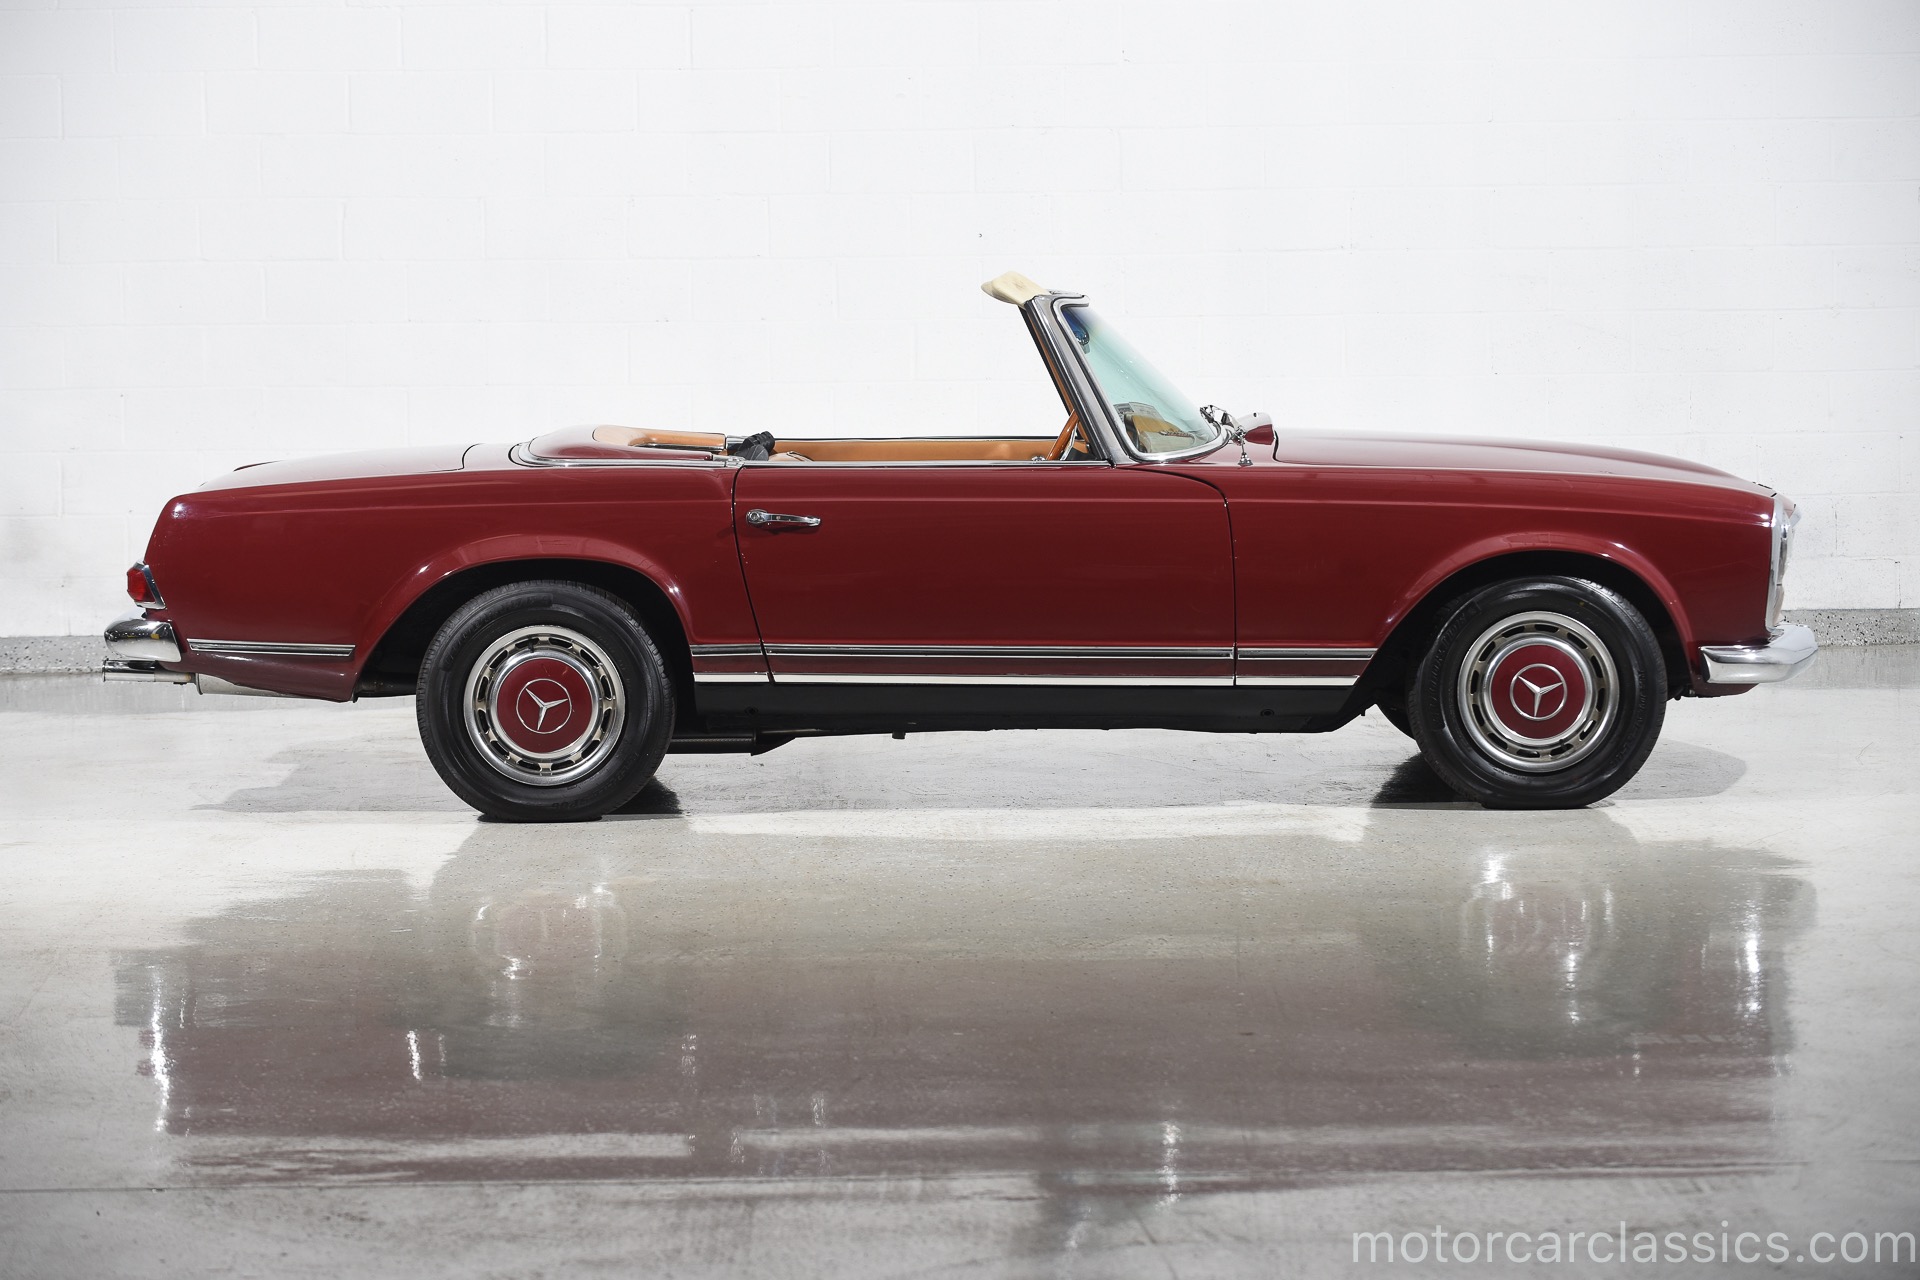 Used 1967 Mercedes-Benz SL-Class 230SL For Sale ($49,900 ...